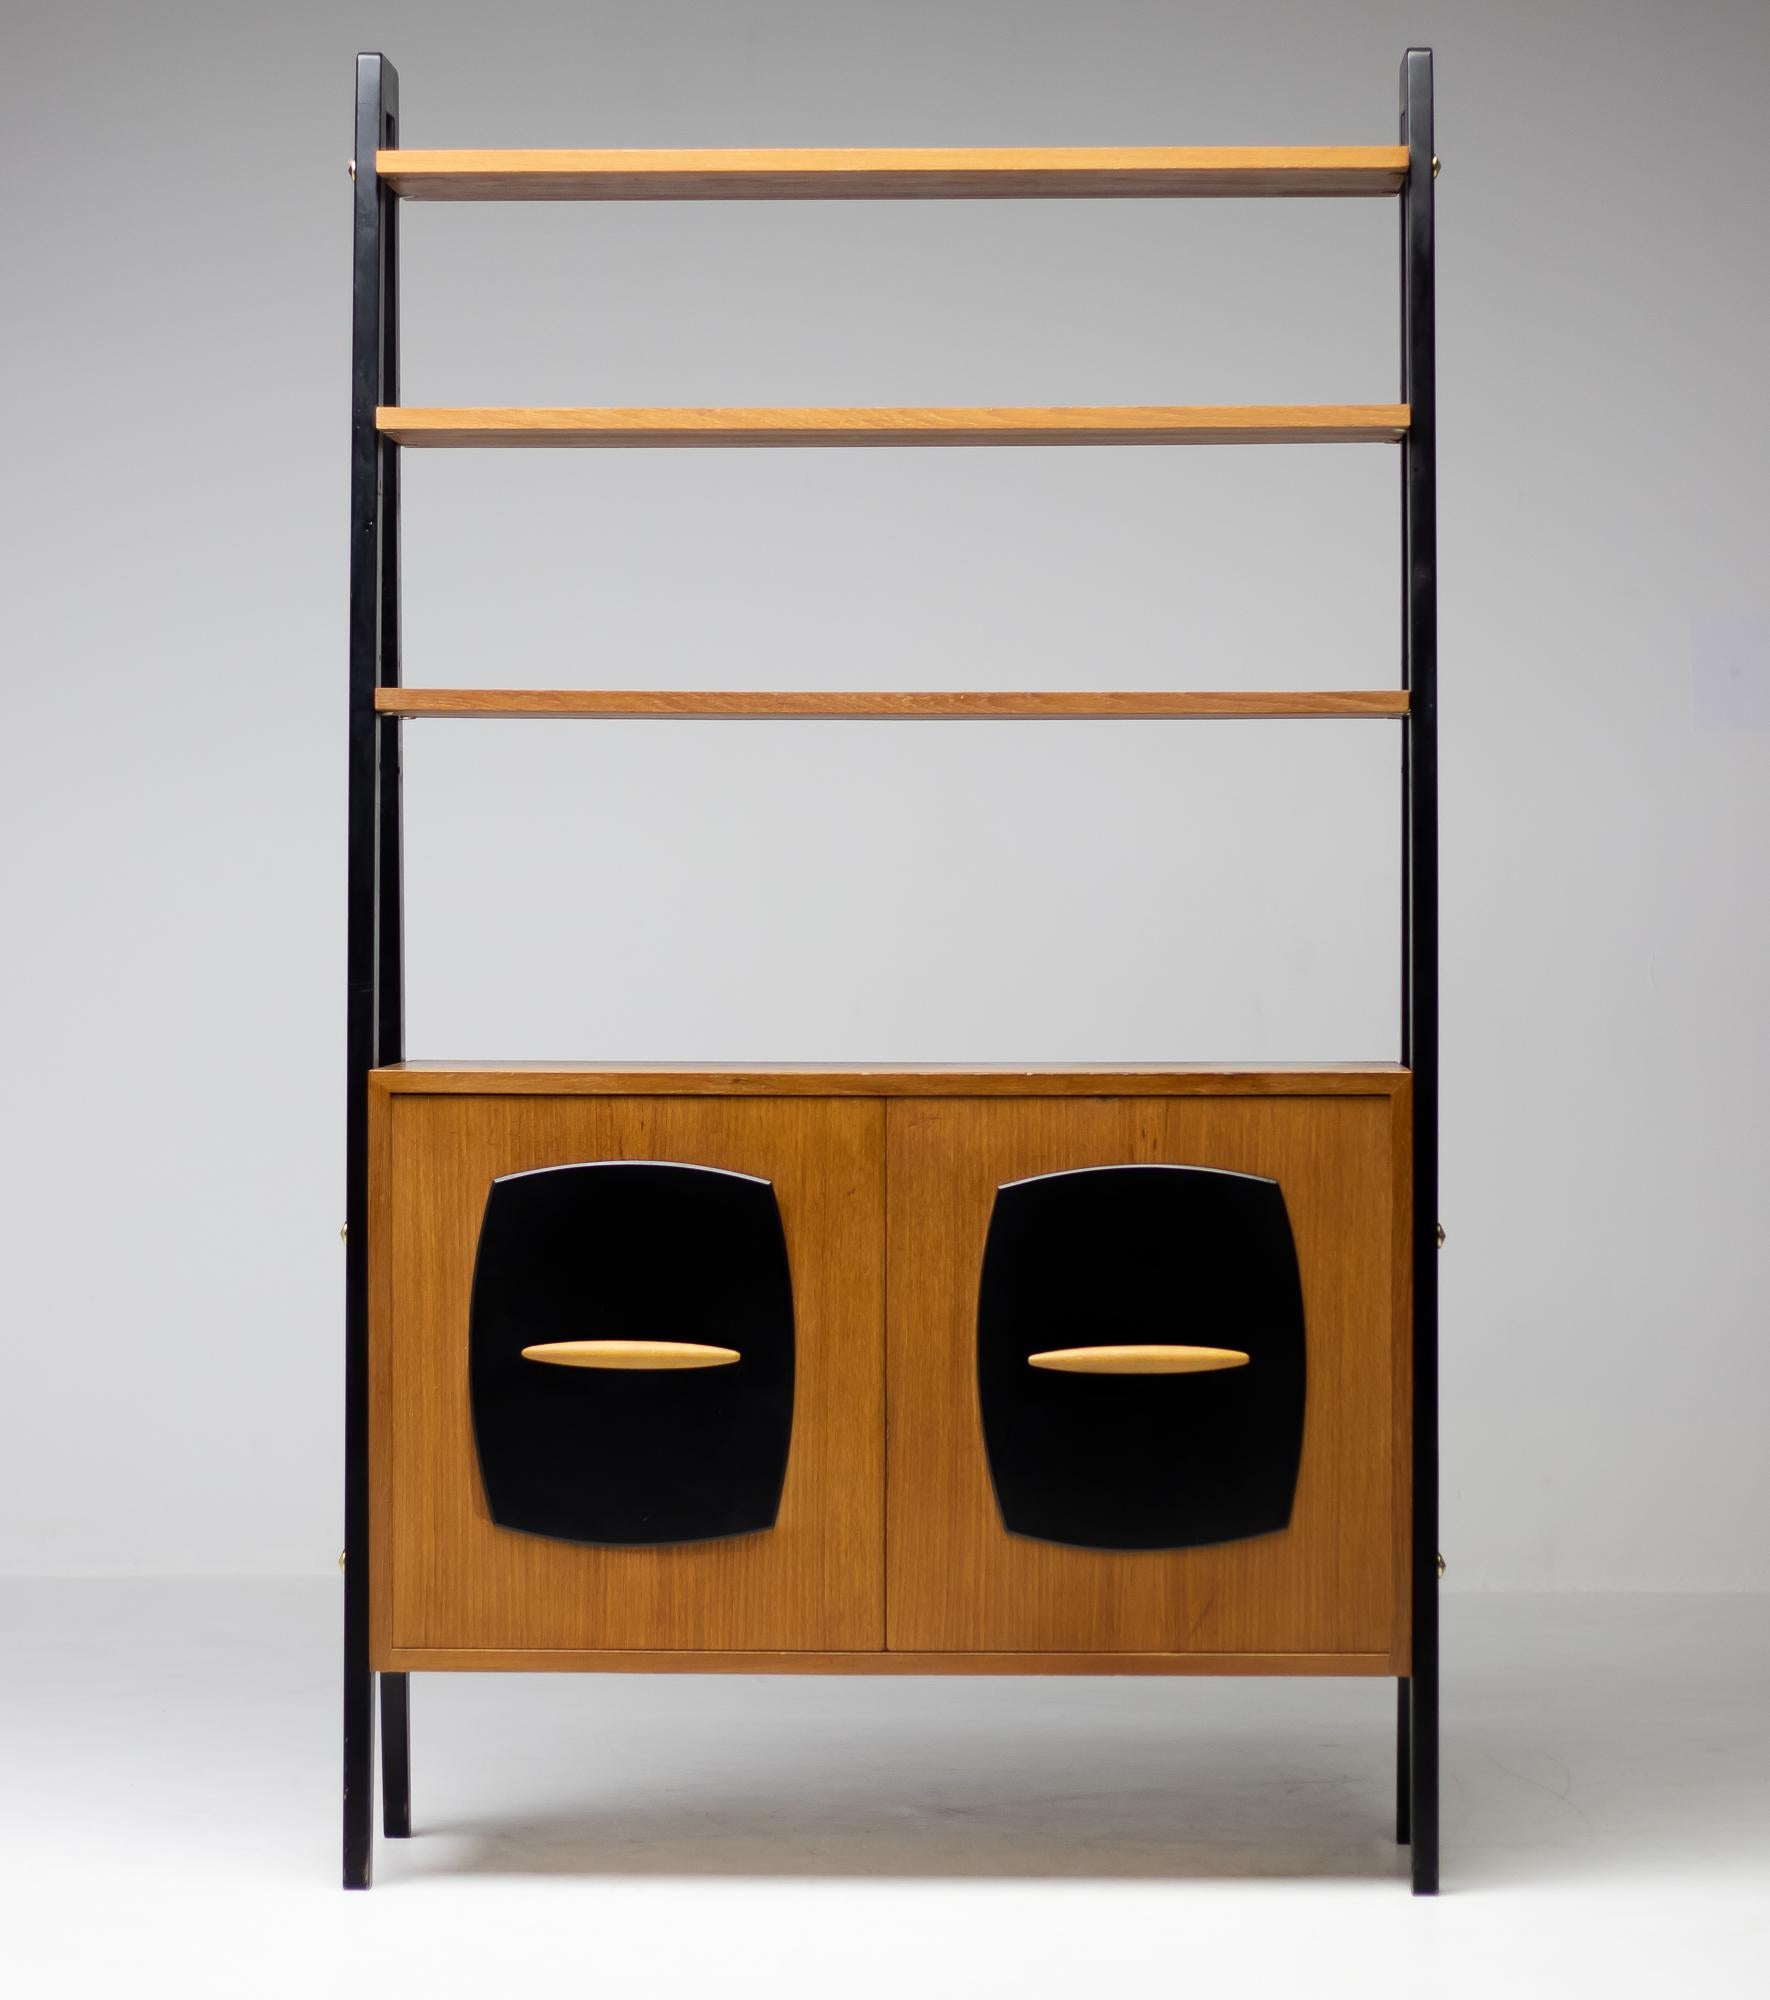 Elegant 1950's bookcase in teak and black lacquered wood that can be used as a room divider.
Great vintage condition.